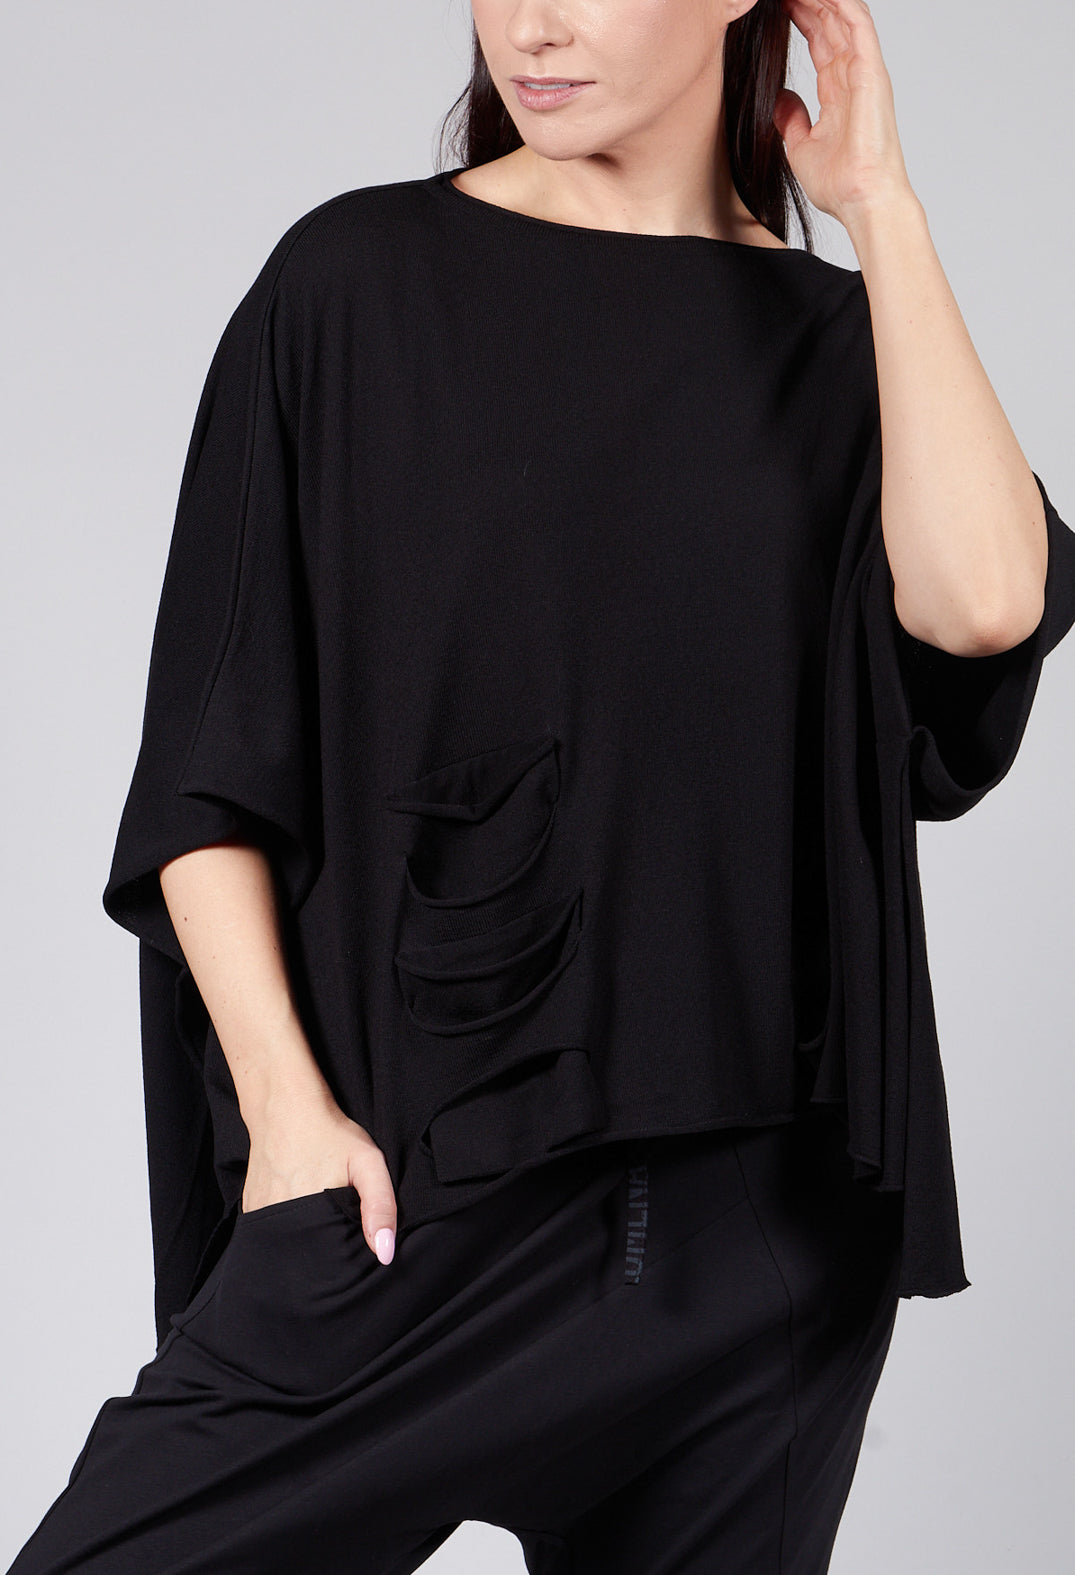 Cape Style Jumper in Black